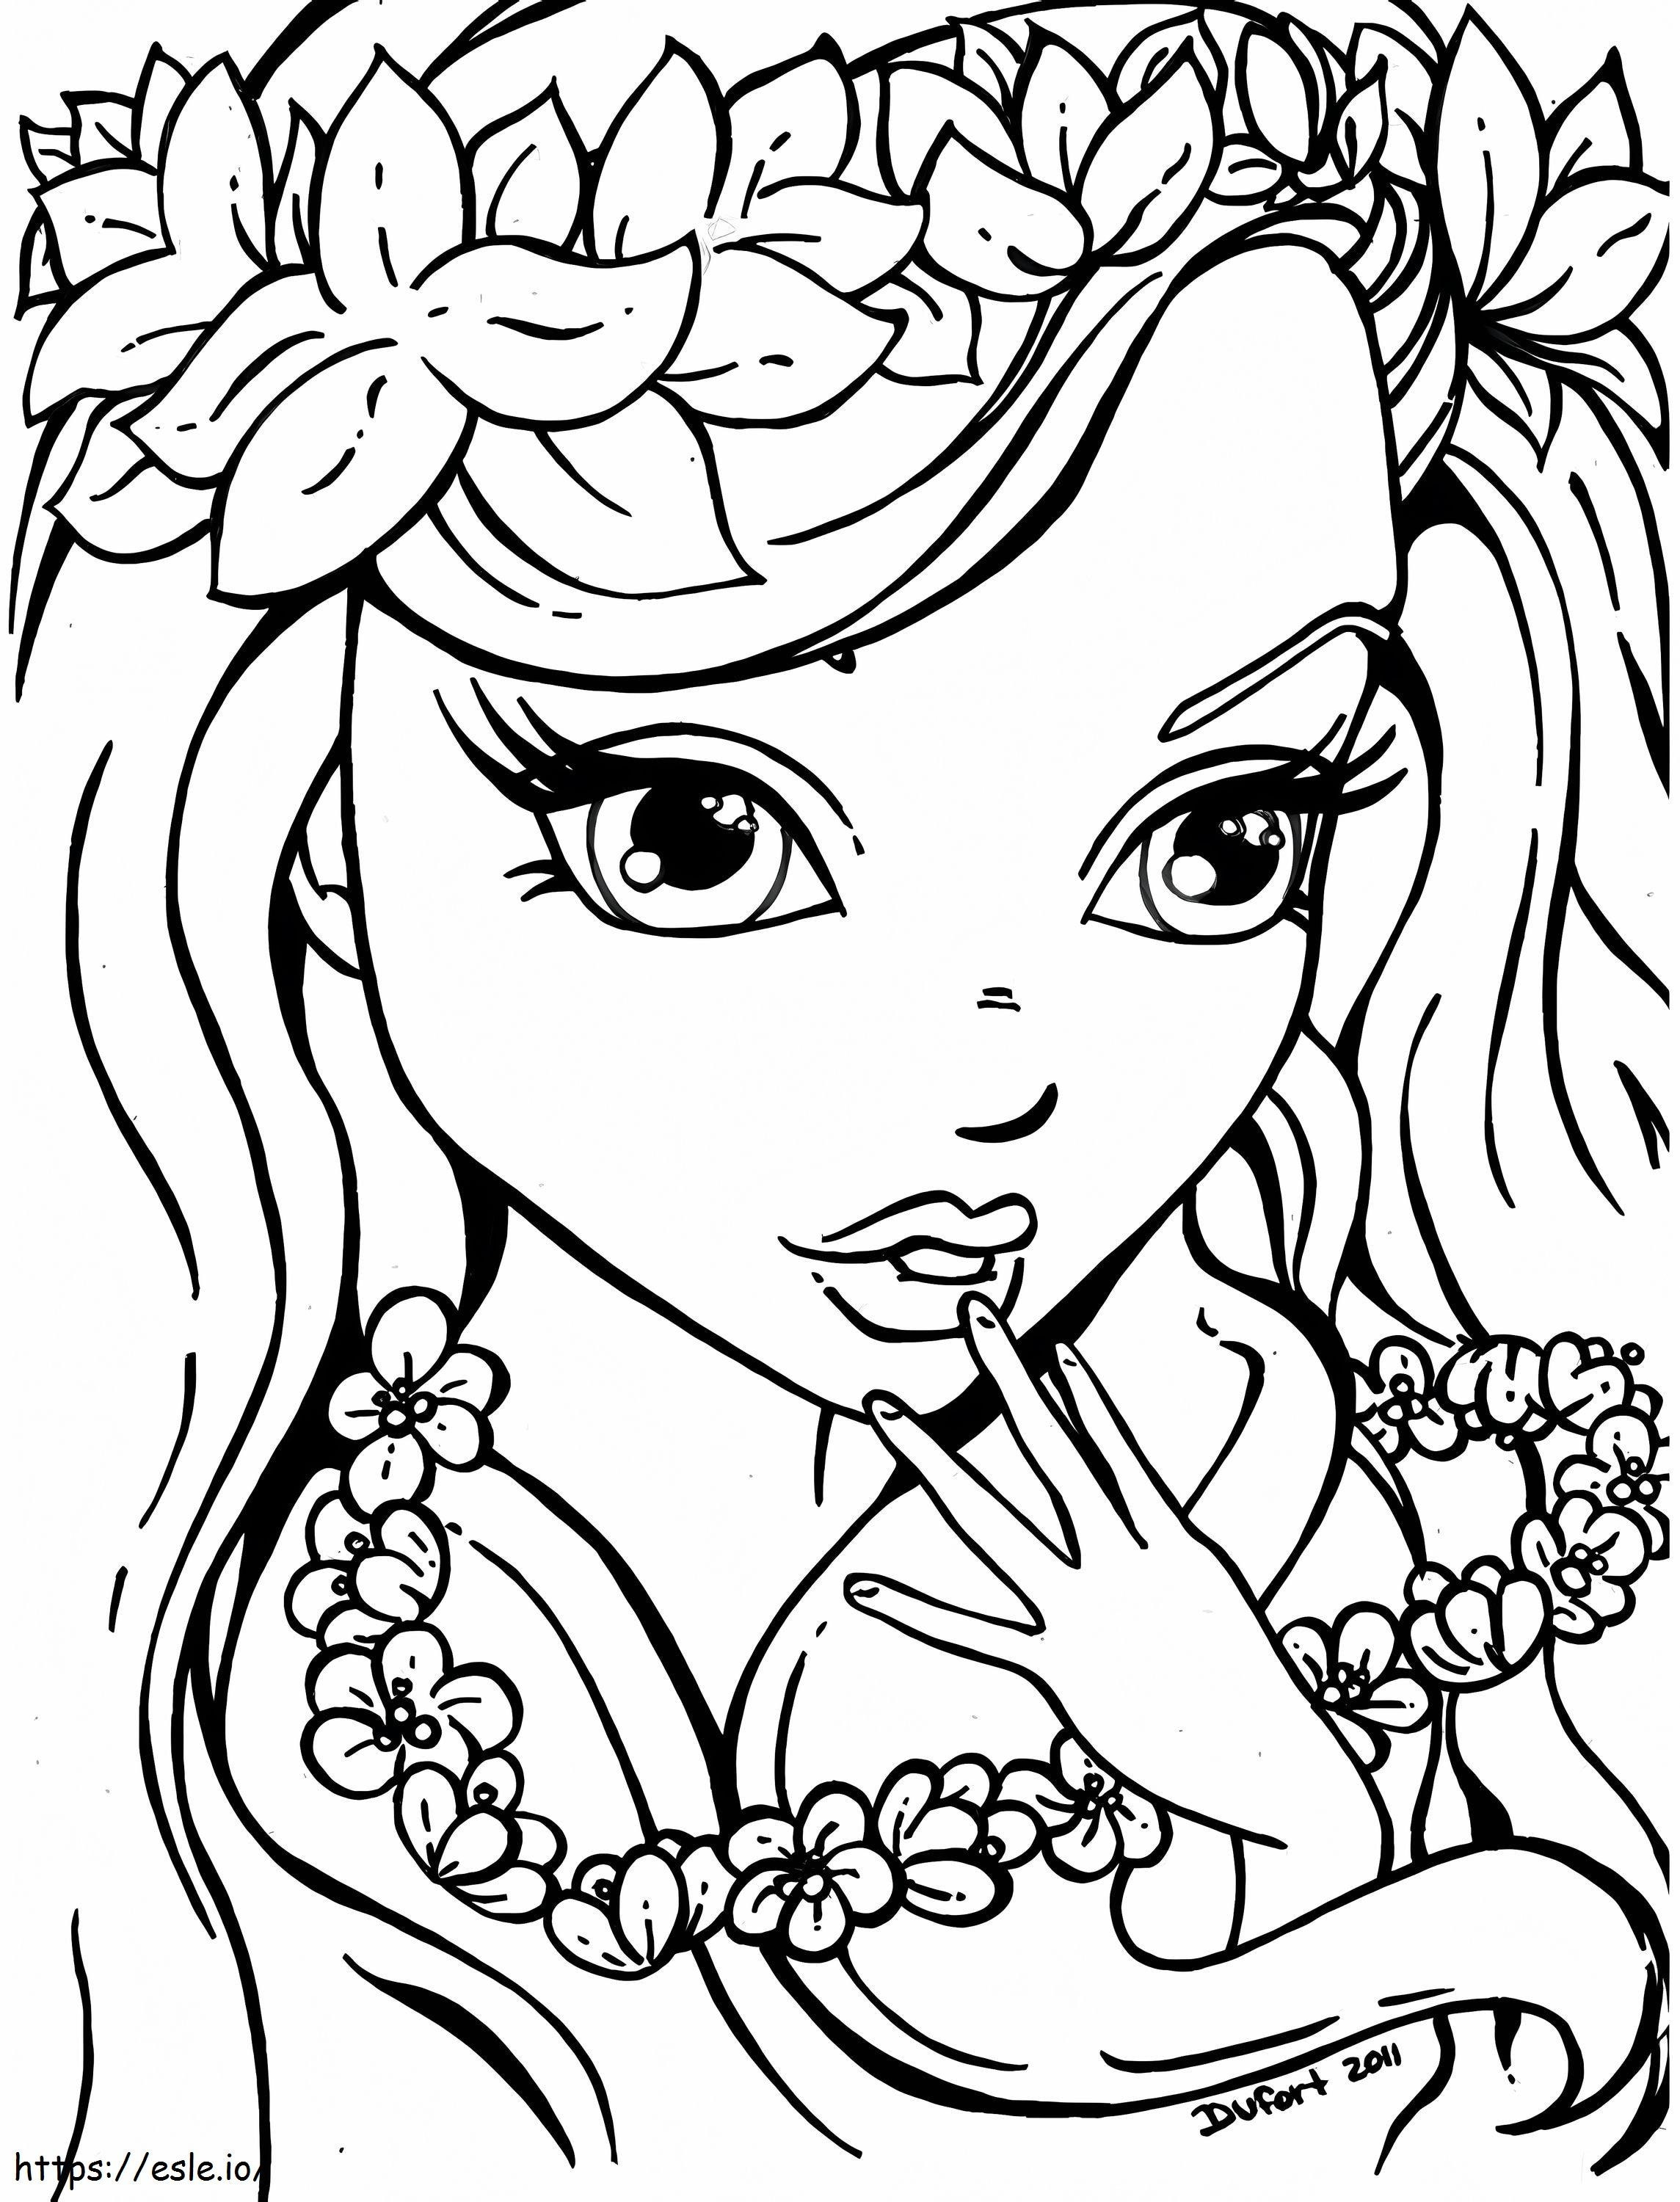 Teen Girl coloring page